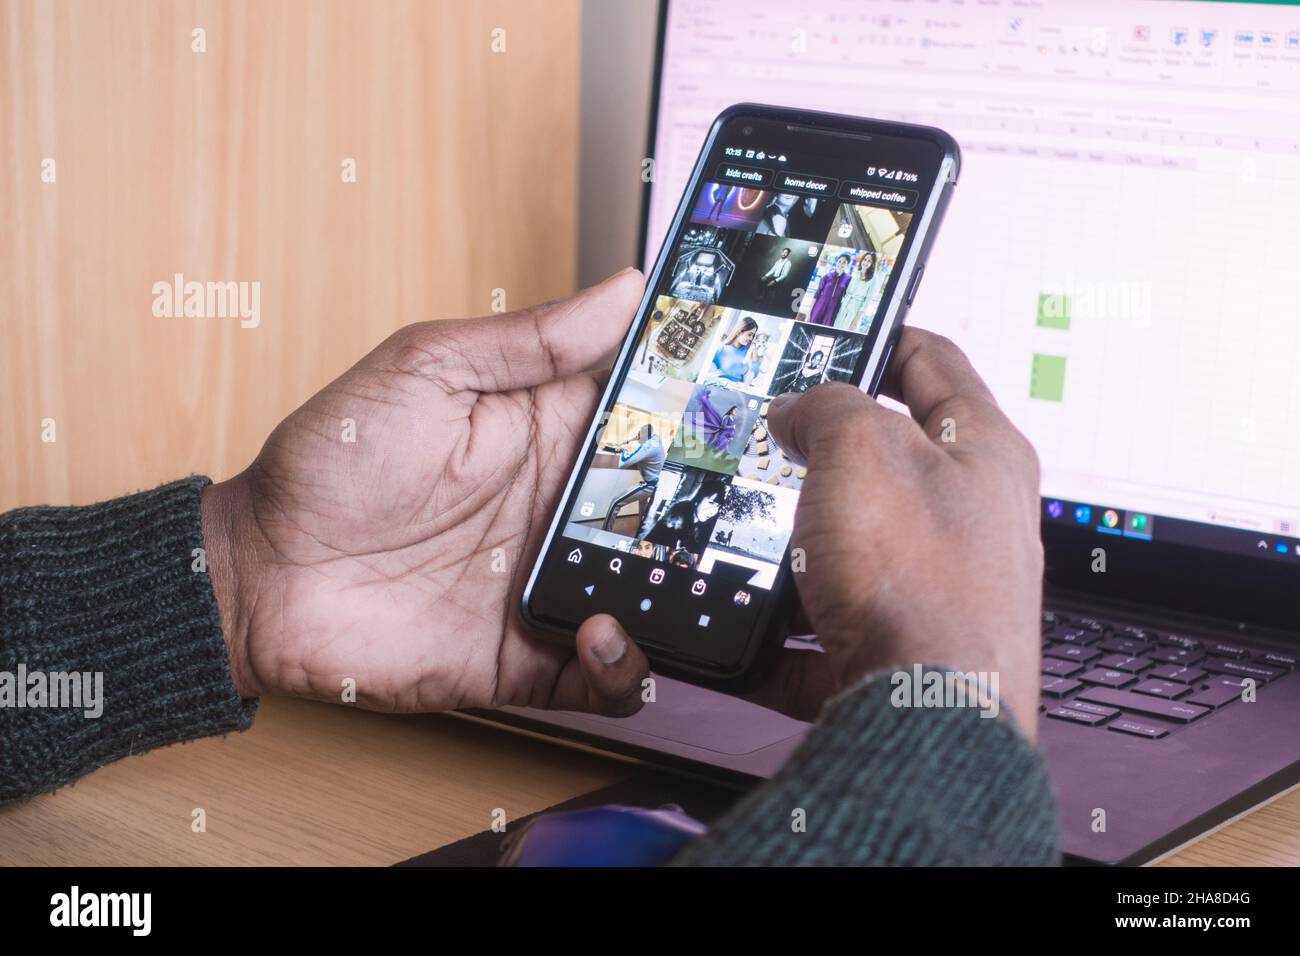 Adult male hands holding smartphone and checking social media Instagram with a Laptop in background as a concept of work distraction Stock Photo